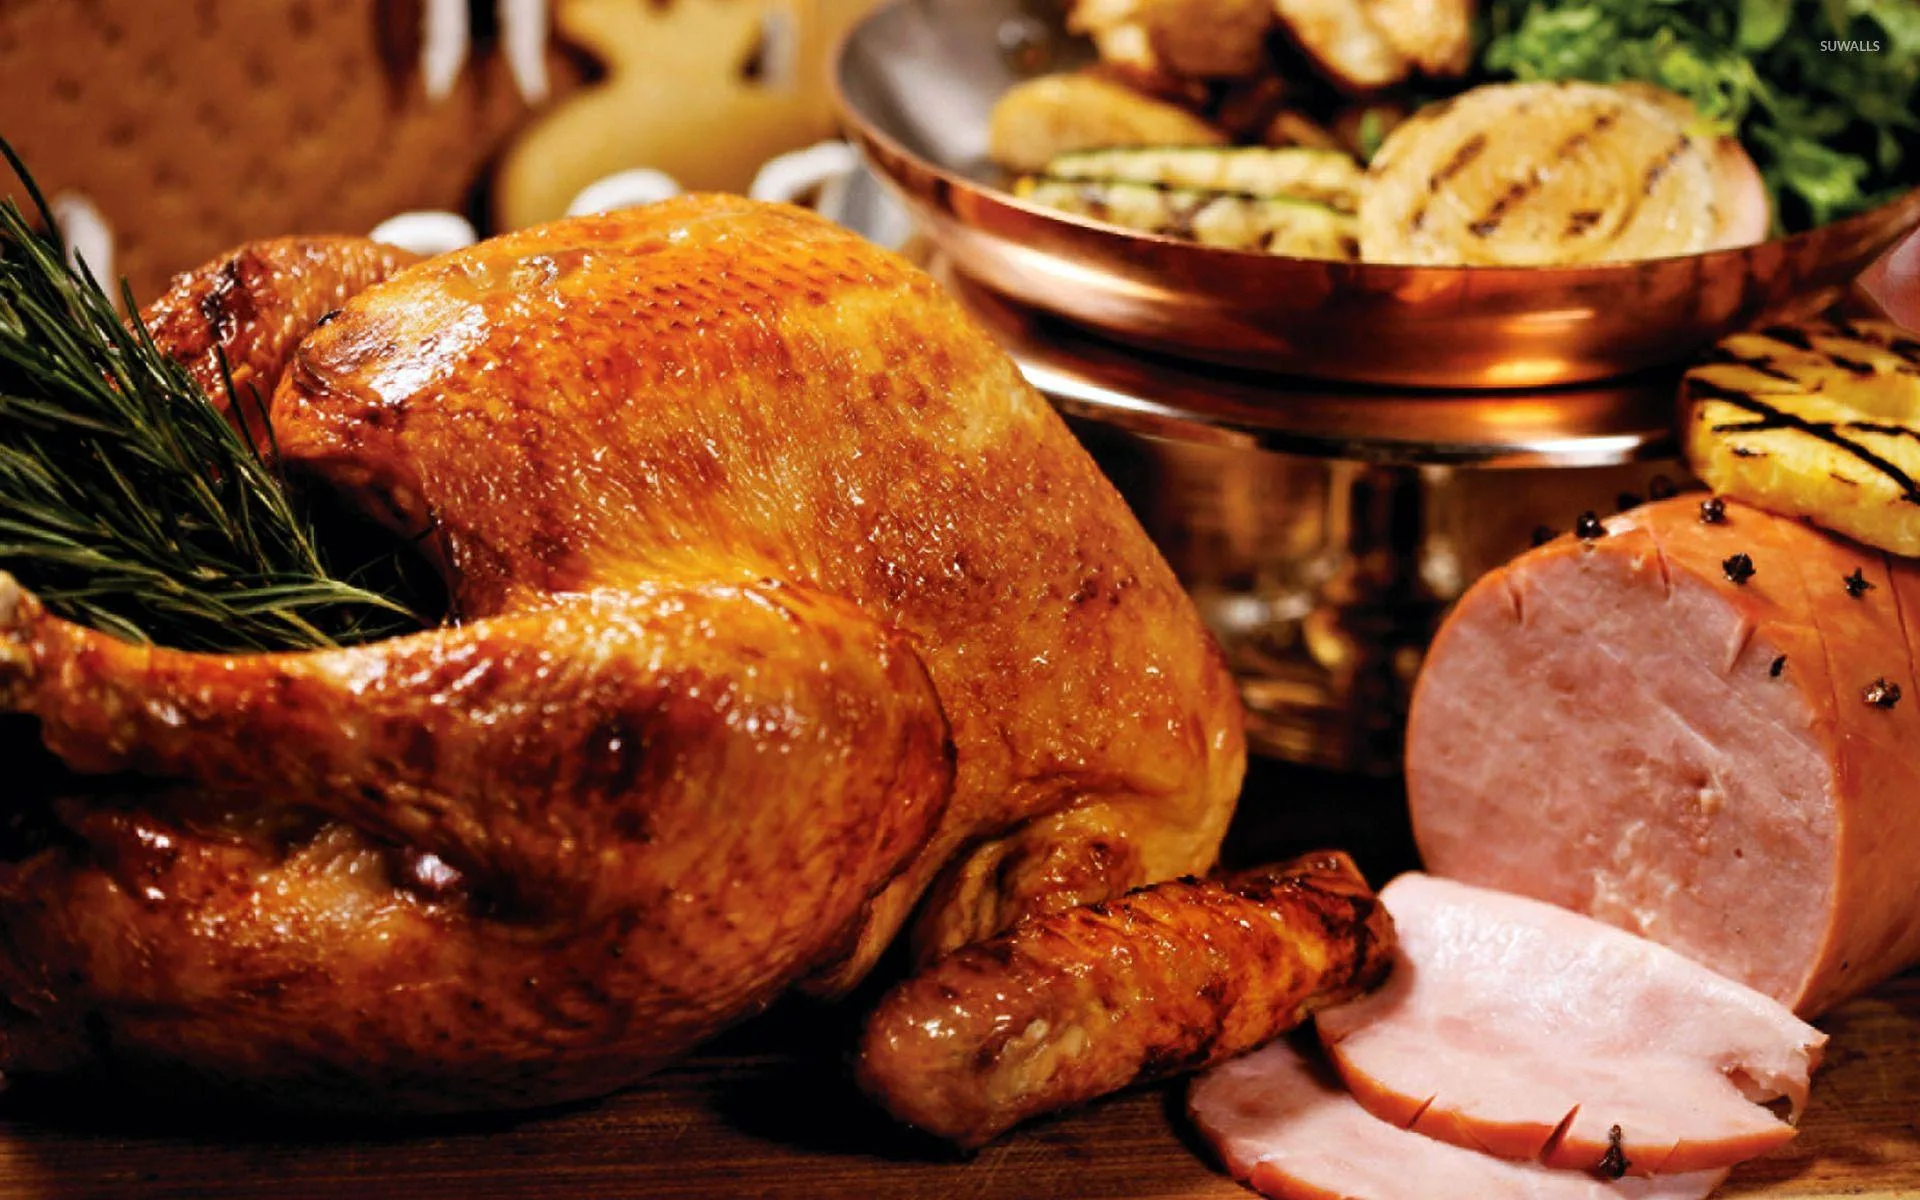 "The Perfect Turkey recipes: A Culinary Symphony of Flavors and Traditions"